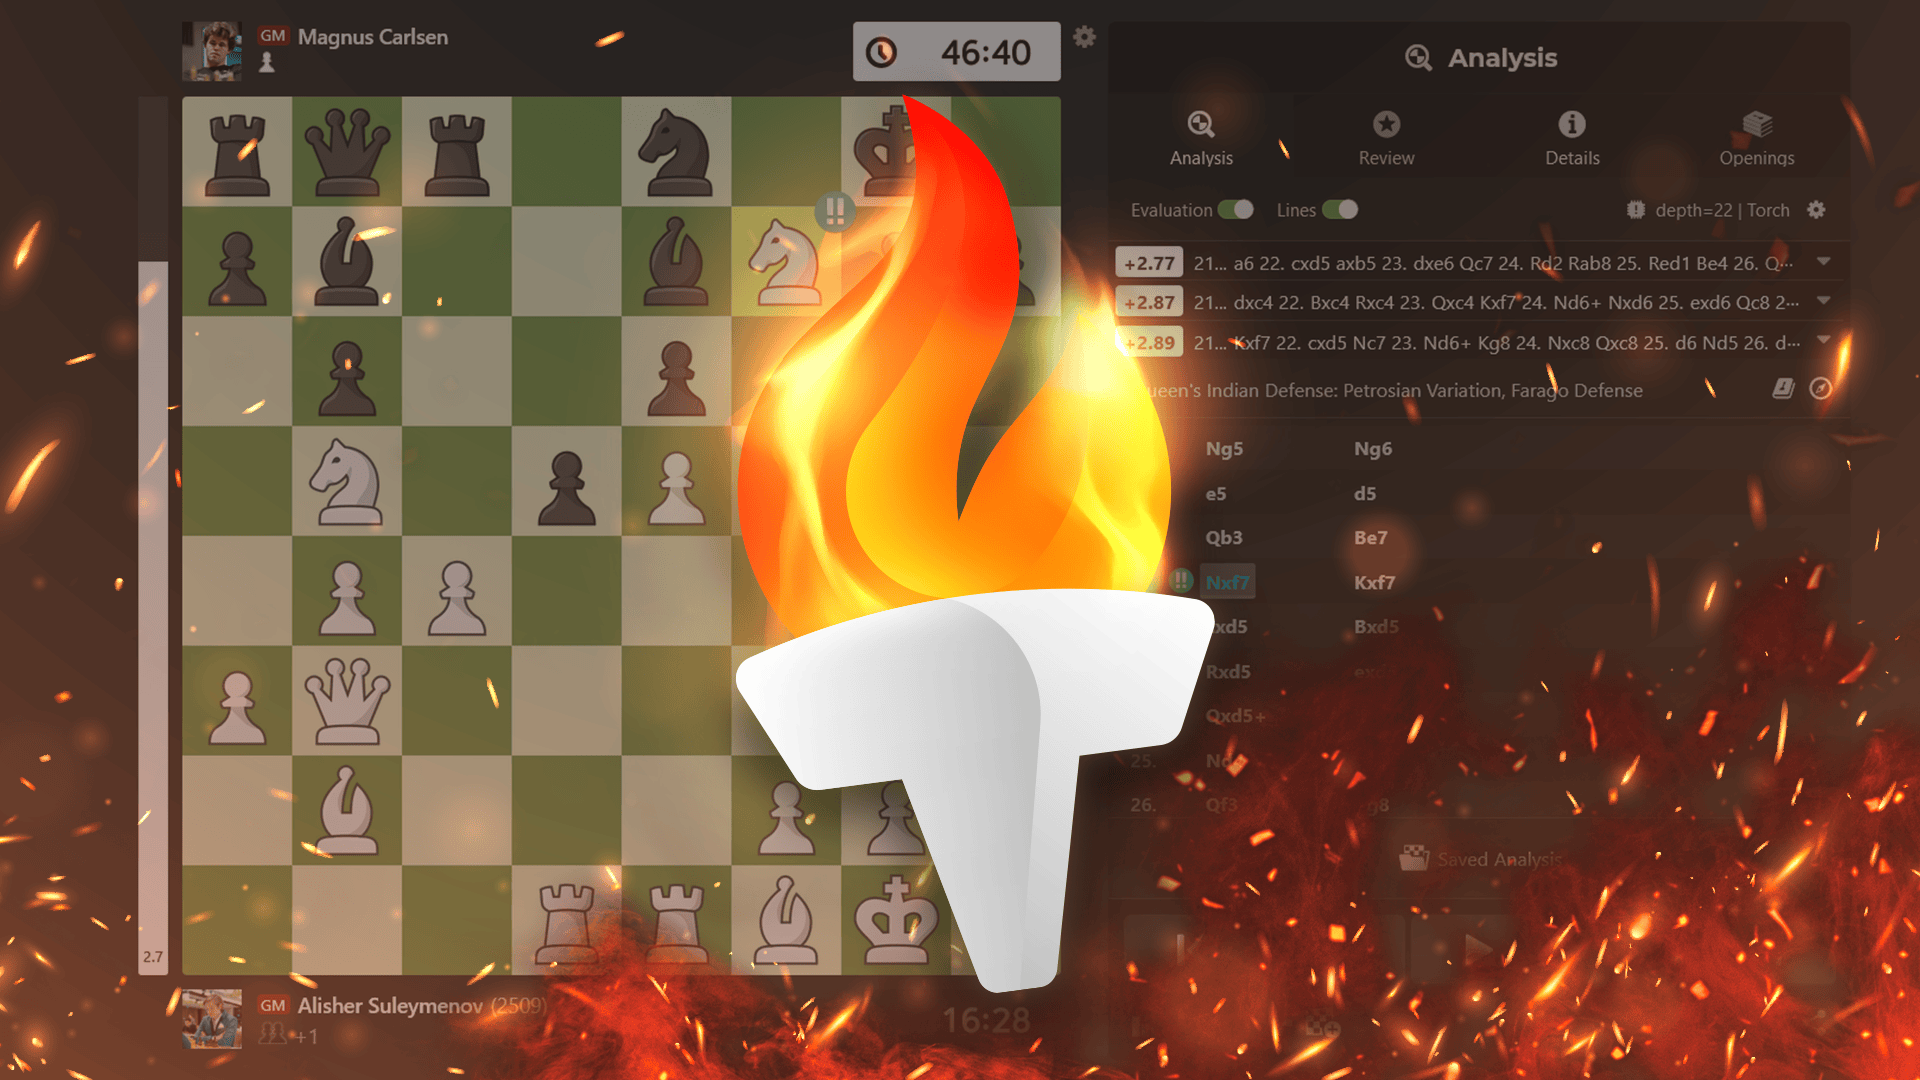 Chess.com Announces New Chess Engine, Torch! Already Ranked #2